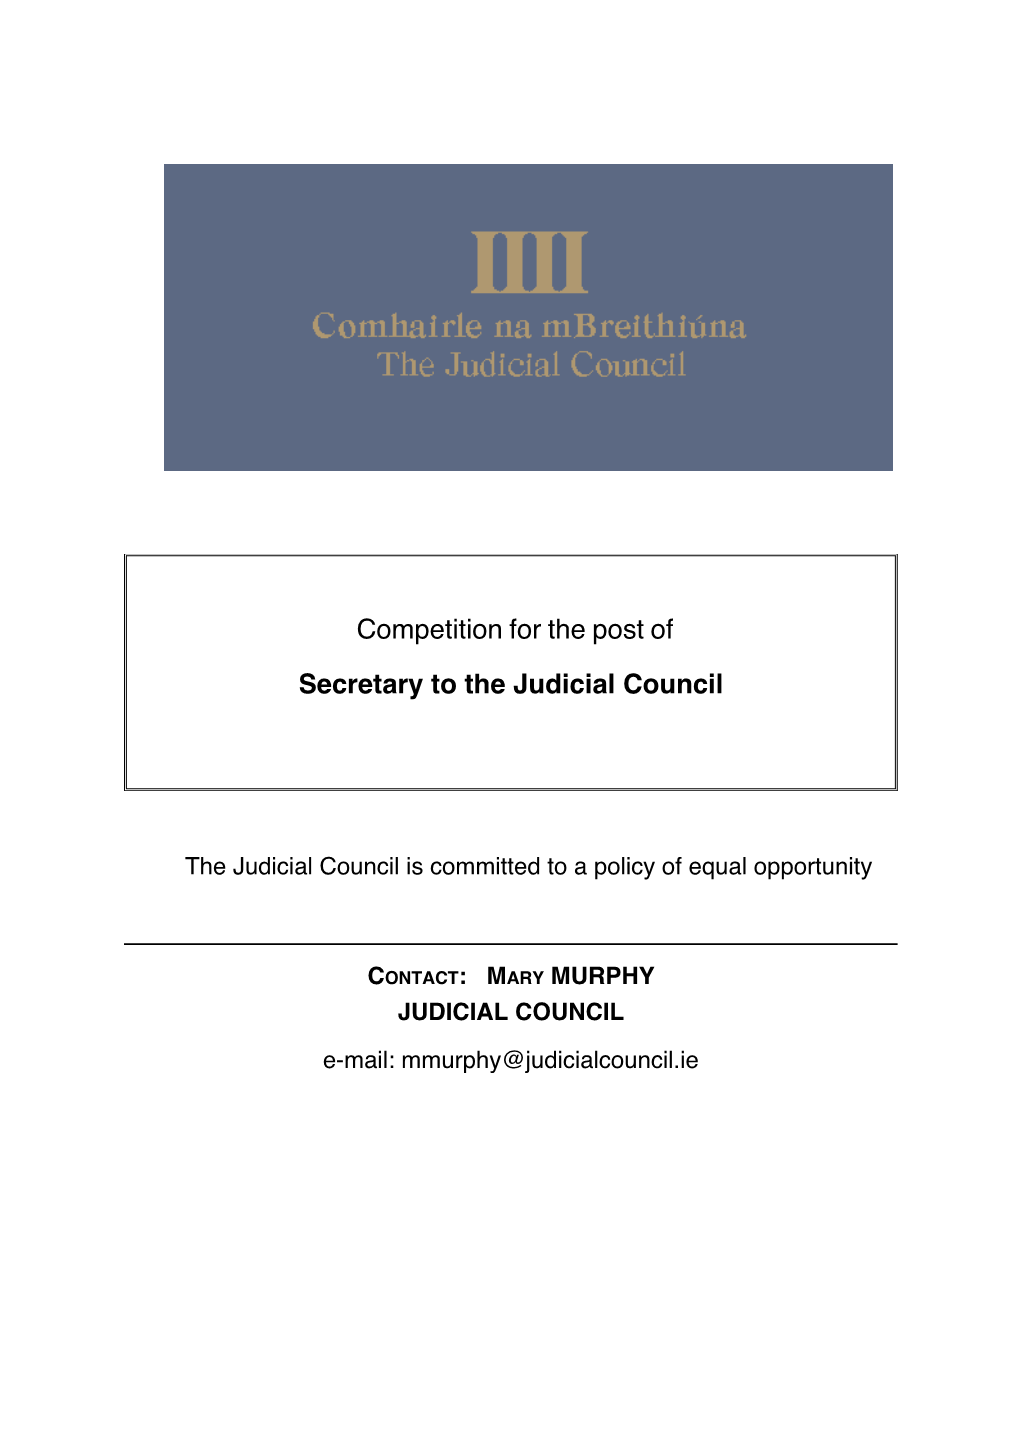 Competition for the Post of Secretary to the Judicial Council